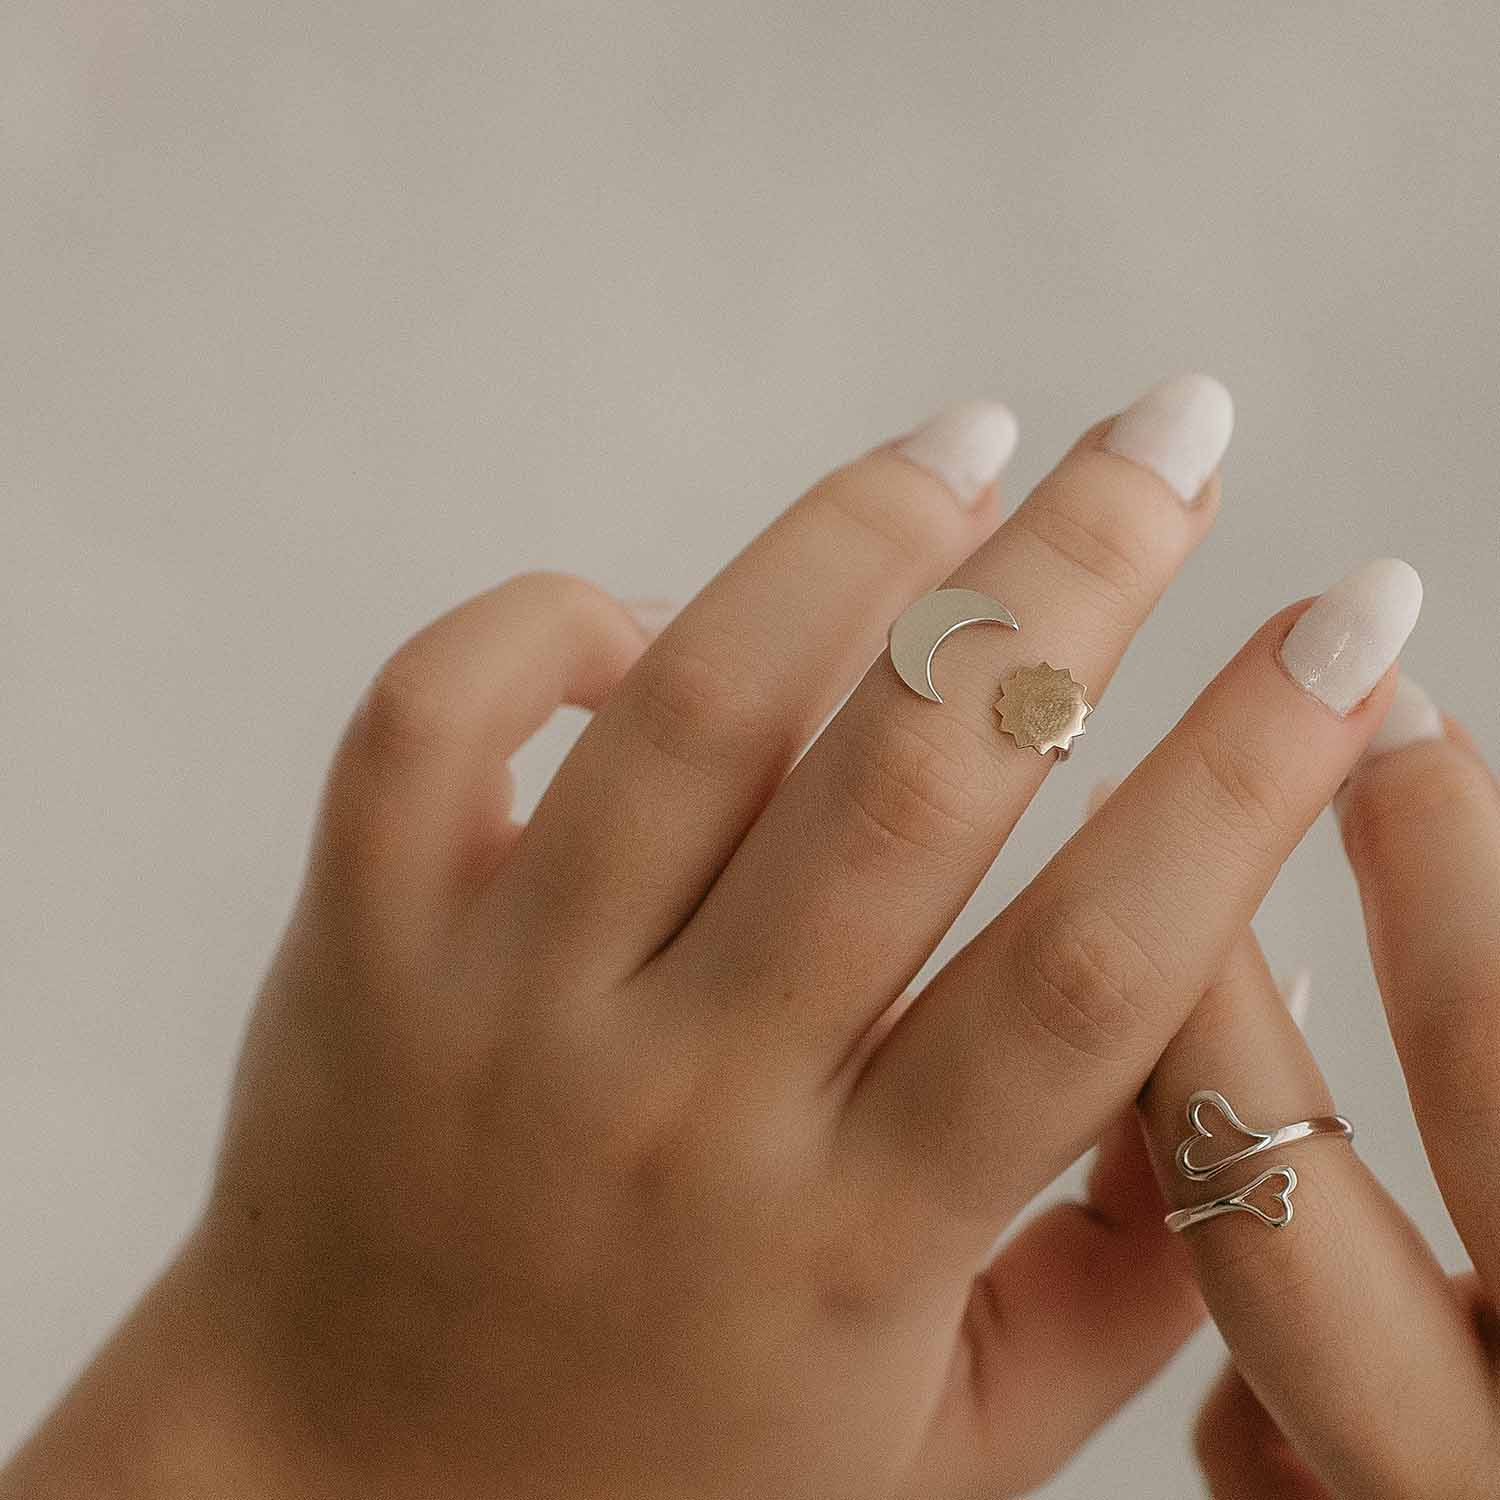 Full Moon Ring - Shop for Korean Skincare, Cosmetics, Beauty and Makeup in  India - Youbae